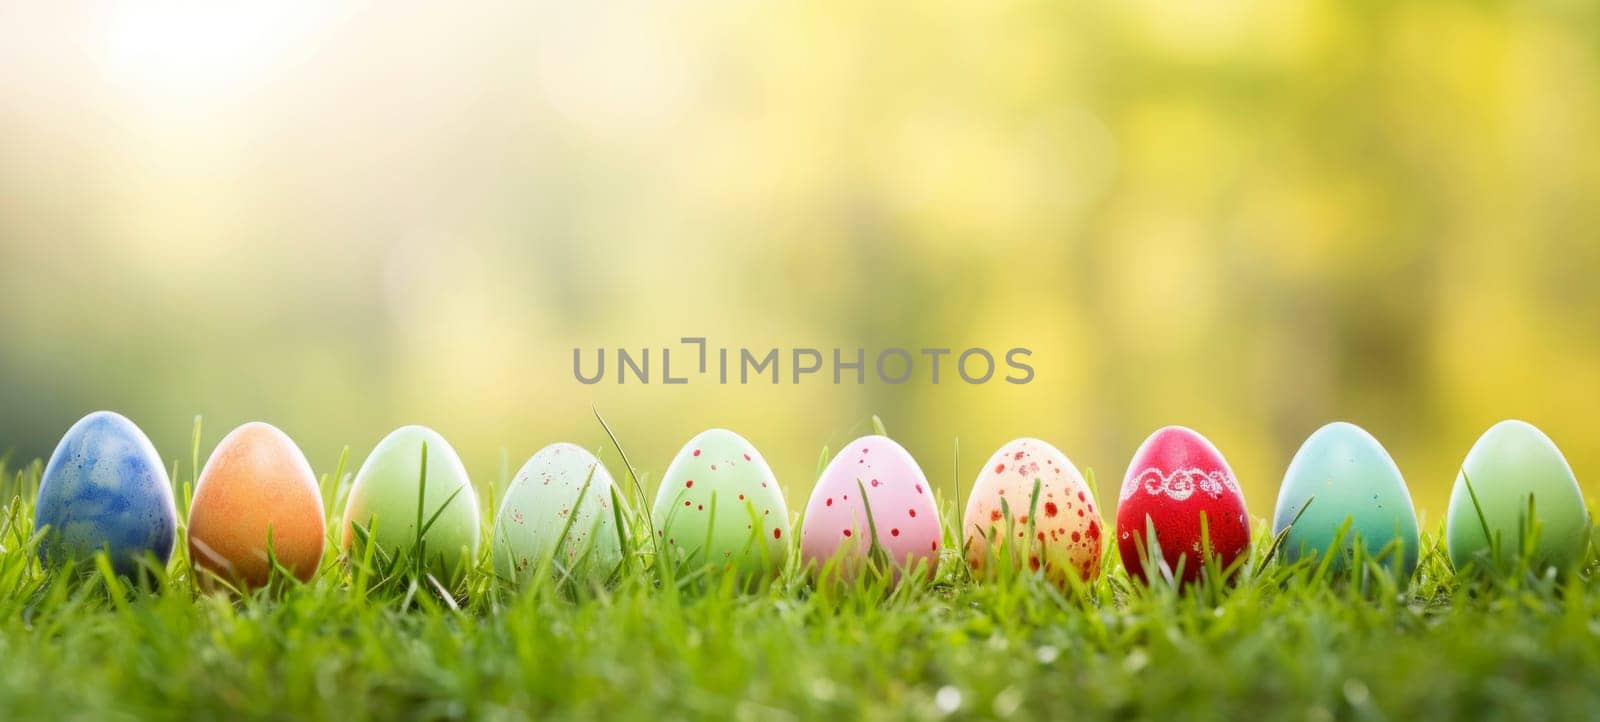 Colorful Easter Eggs Lined Up in Spring Grass by andreyz